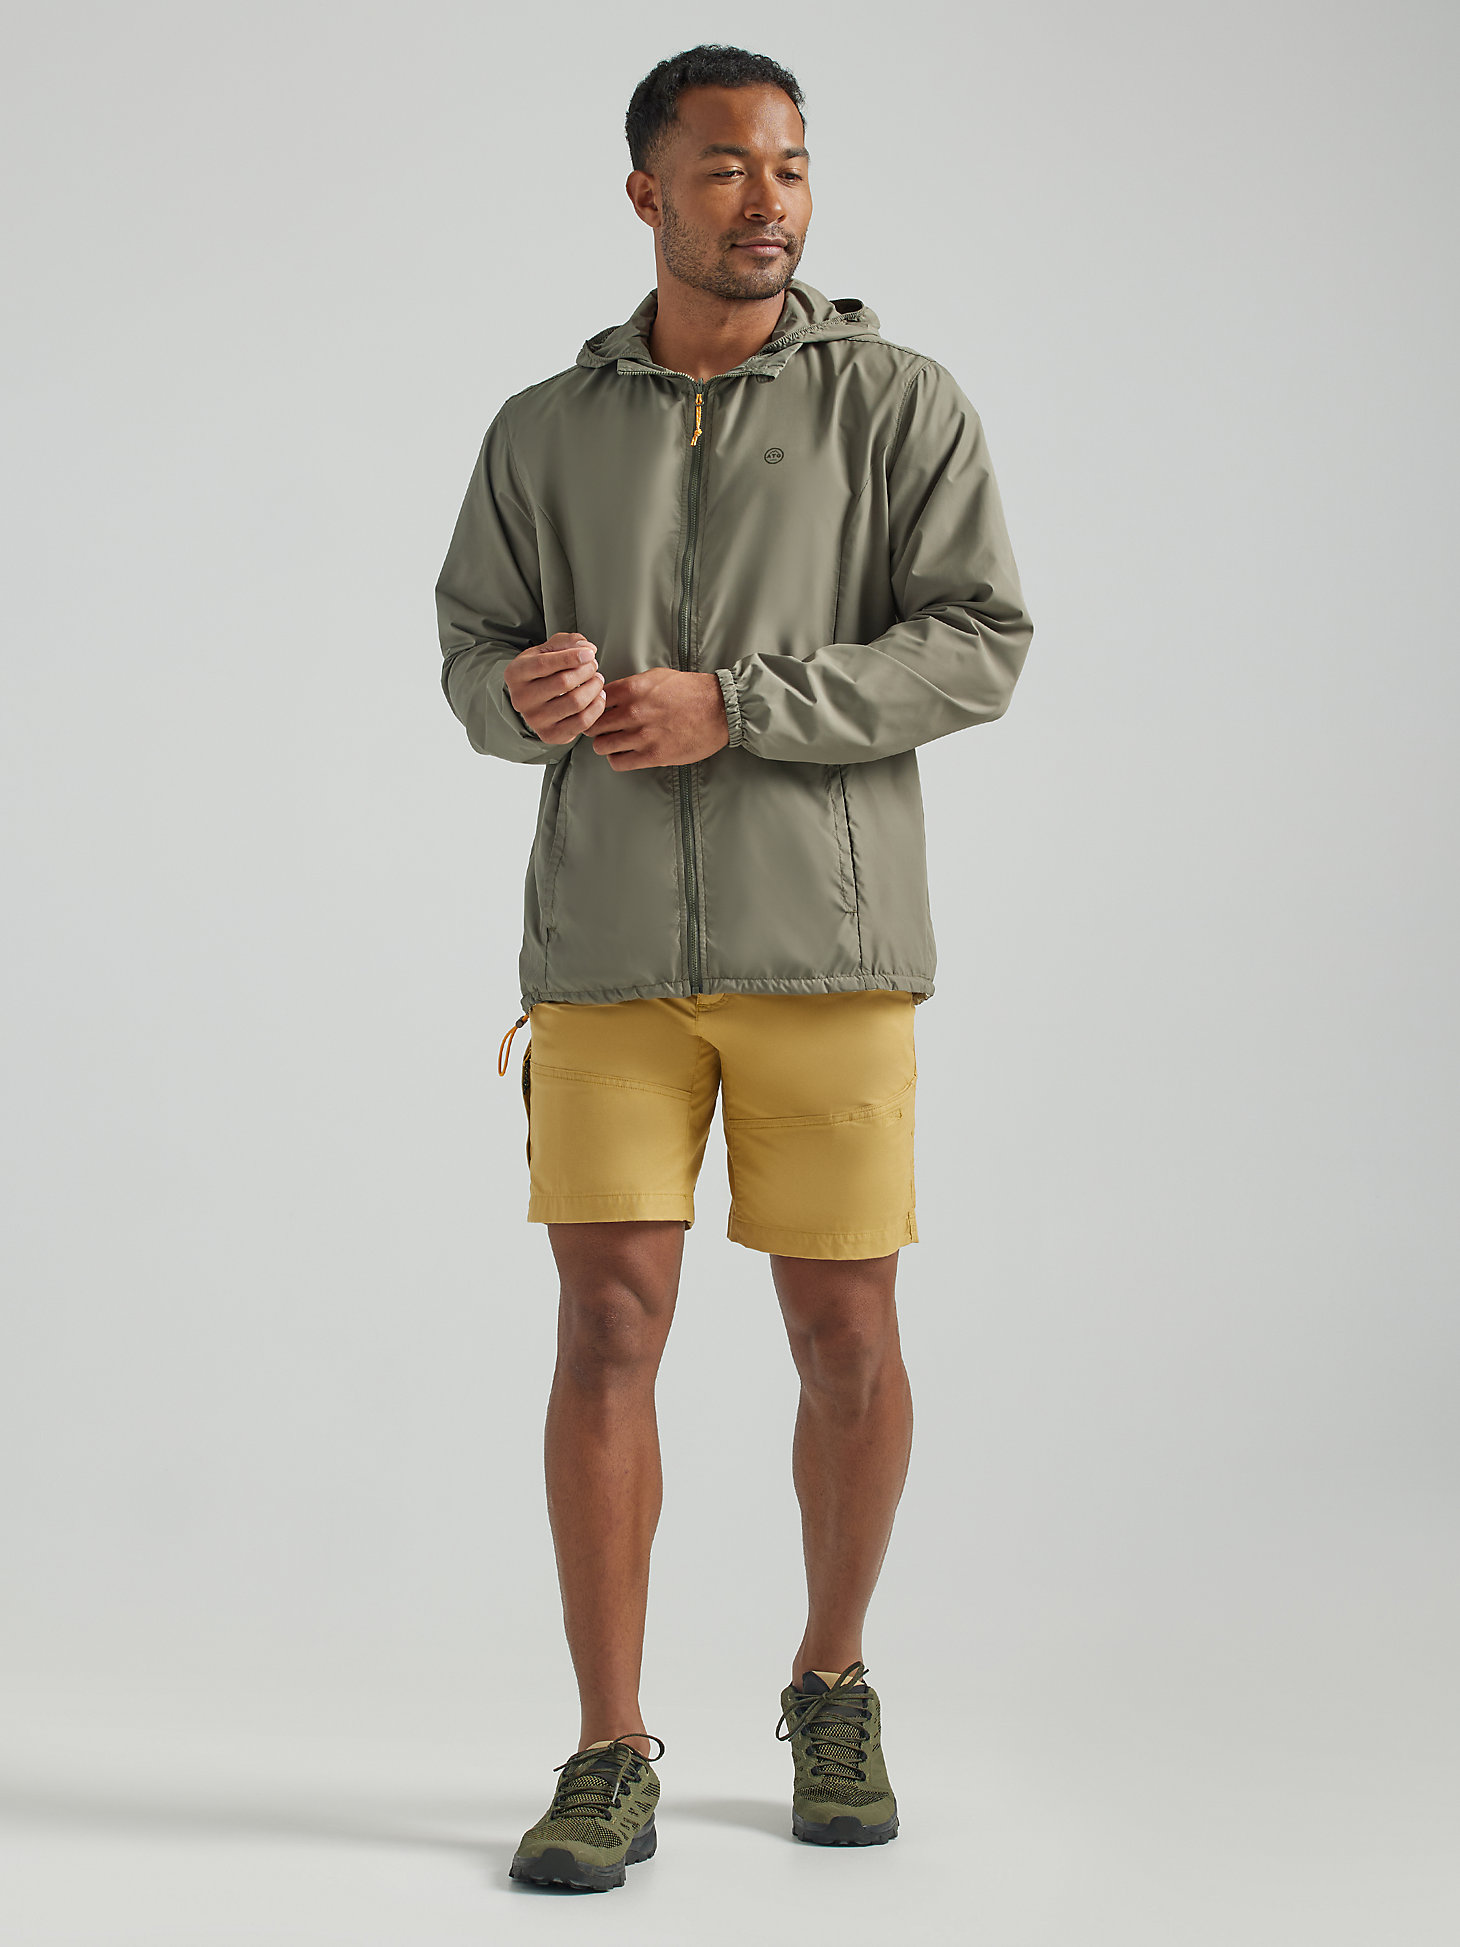 Lightweight Packable Jacket in Dusty Olive alternative view 1